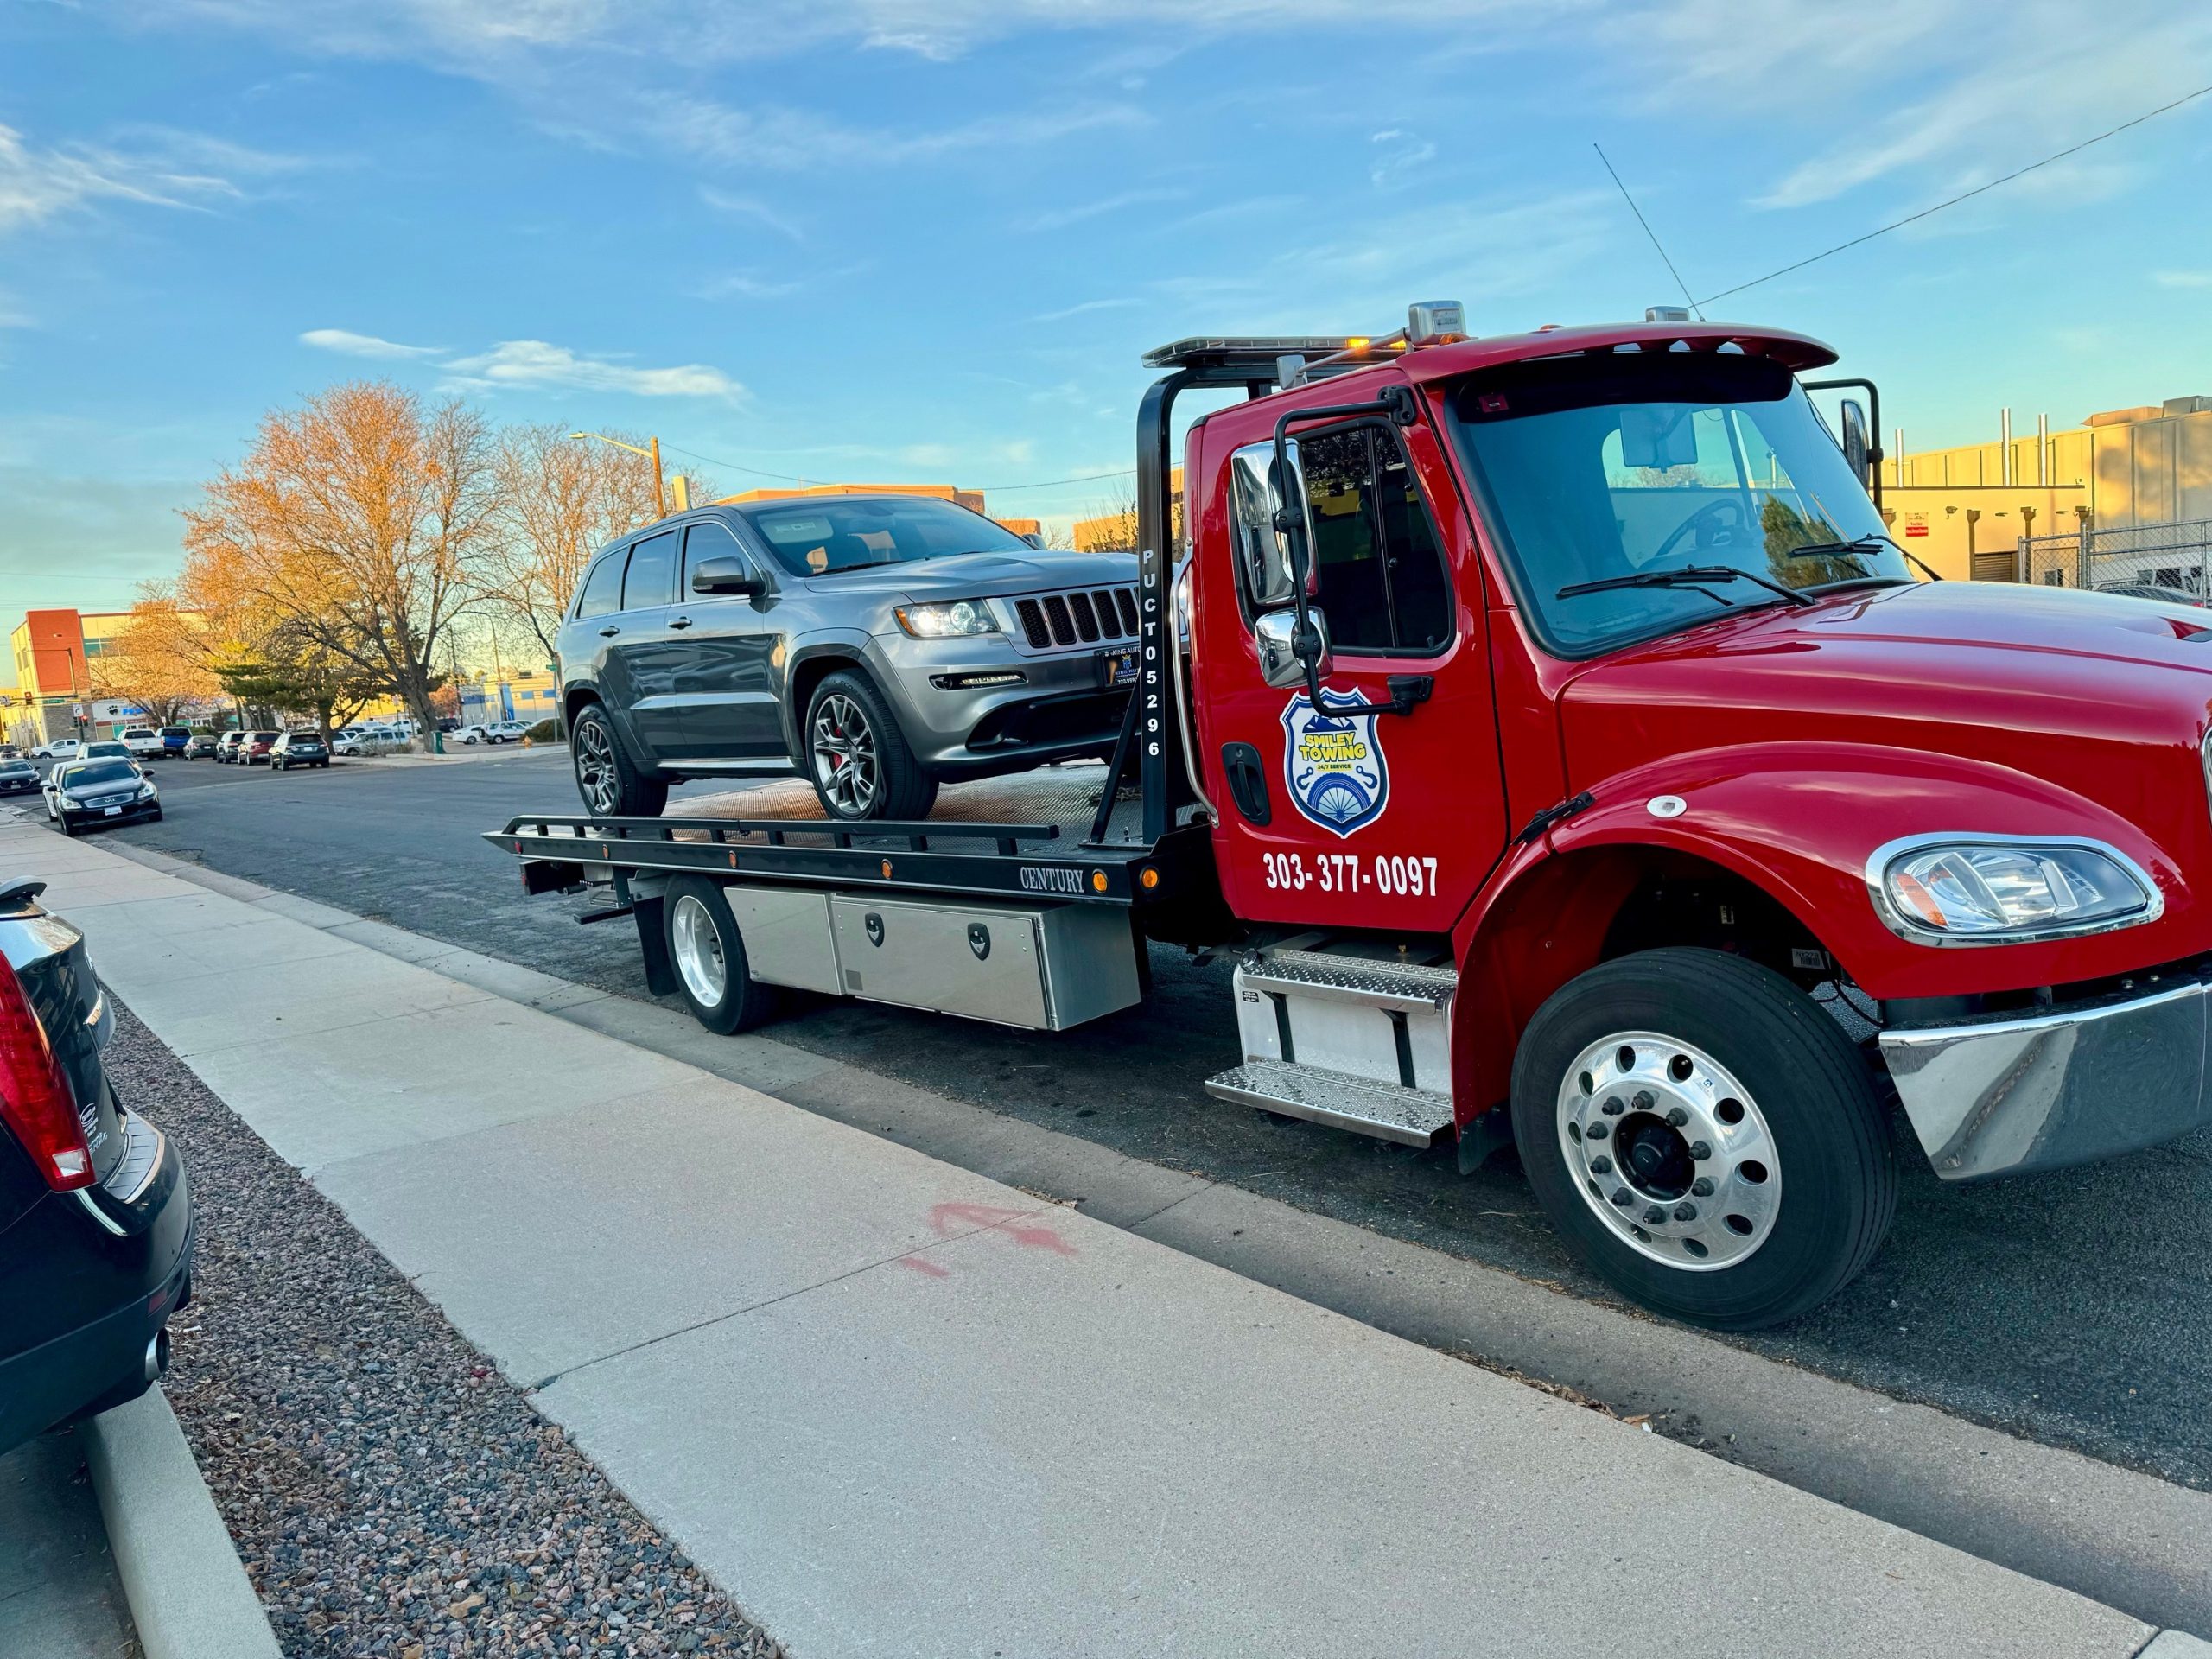 this image shows towing services in Edgewater, CO